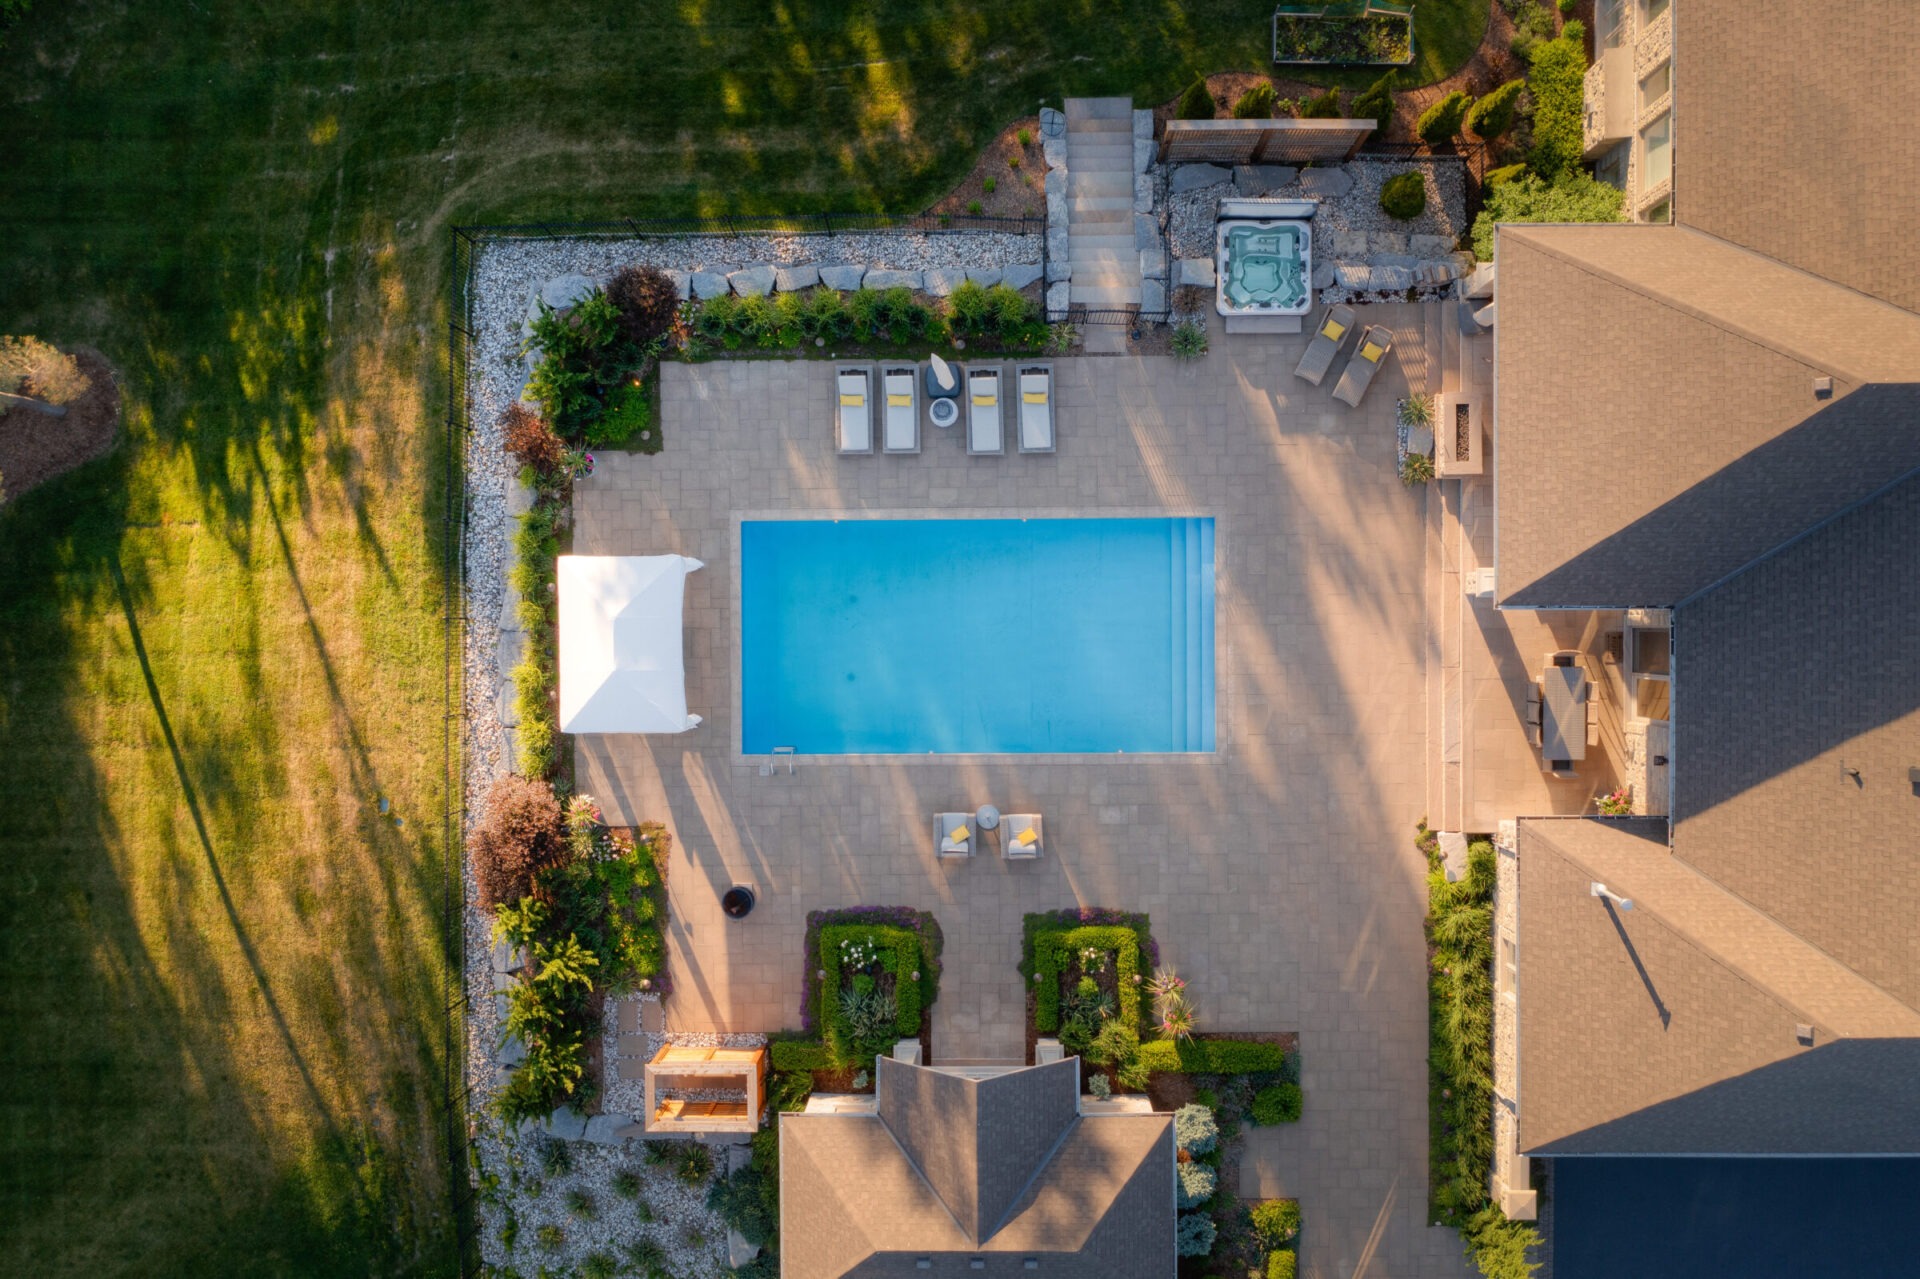 Aerial view of a residential backyard with a rectangular pool, lounge chairs, jacuzzi, manicured gardens, and a house during the golden hour.